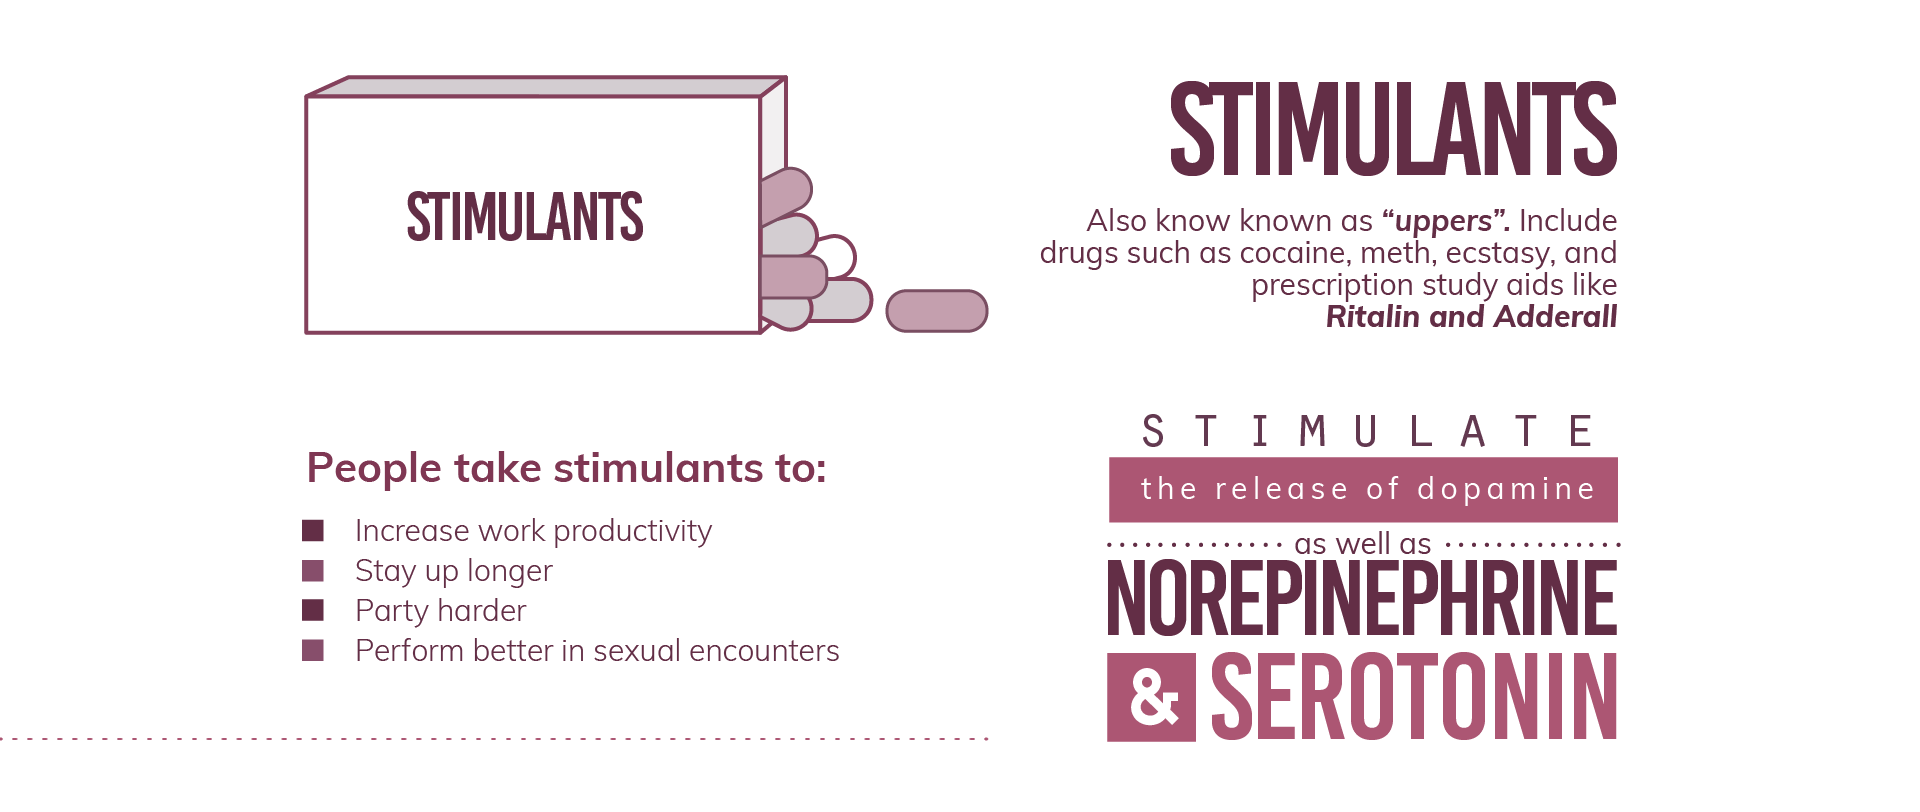 The Stimulants, also known known as "uppers" include drugs such as cocaine, meth, ectasy, and prescription study aids like ritalin and adderall.People take stimulants to increase work productivity, stay up longer, party harder, perform better in sexual encounters. the stimulants stimulate the release of dopamine as well as norepinephrine and serotonin